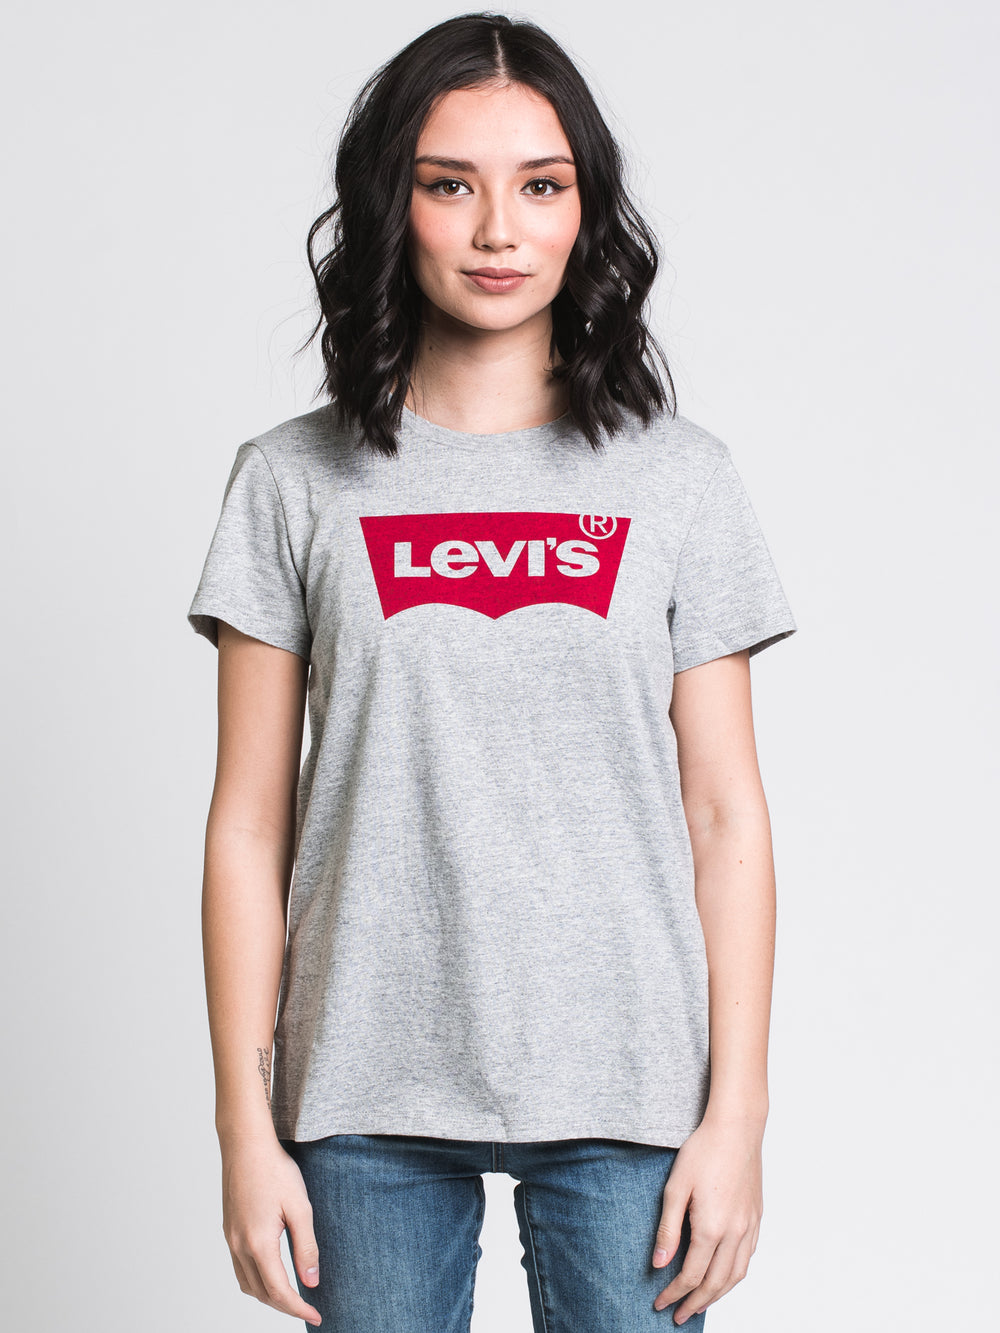 LEVIS BATWING T-SHIRT  - CLEARANCE